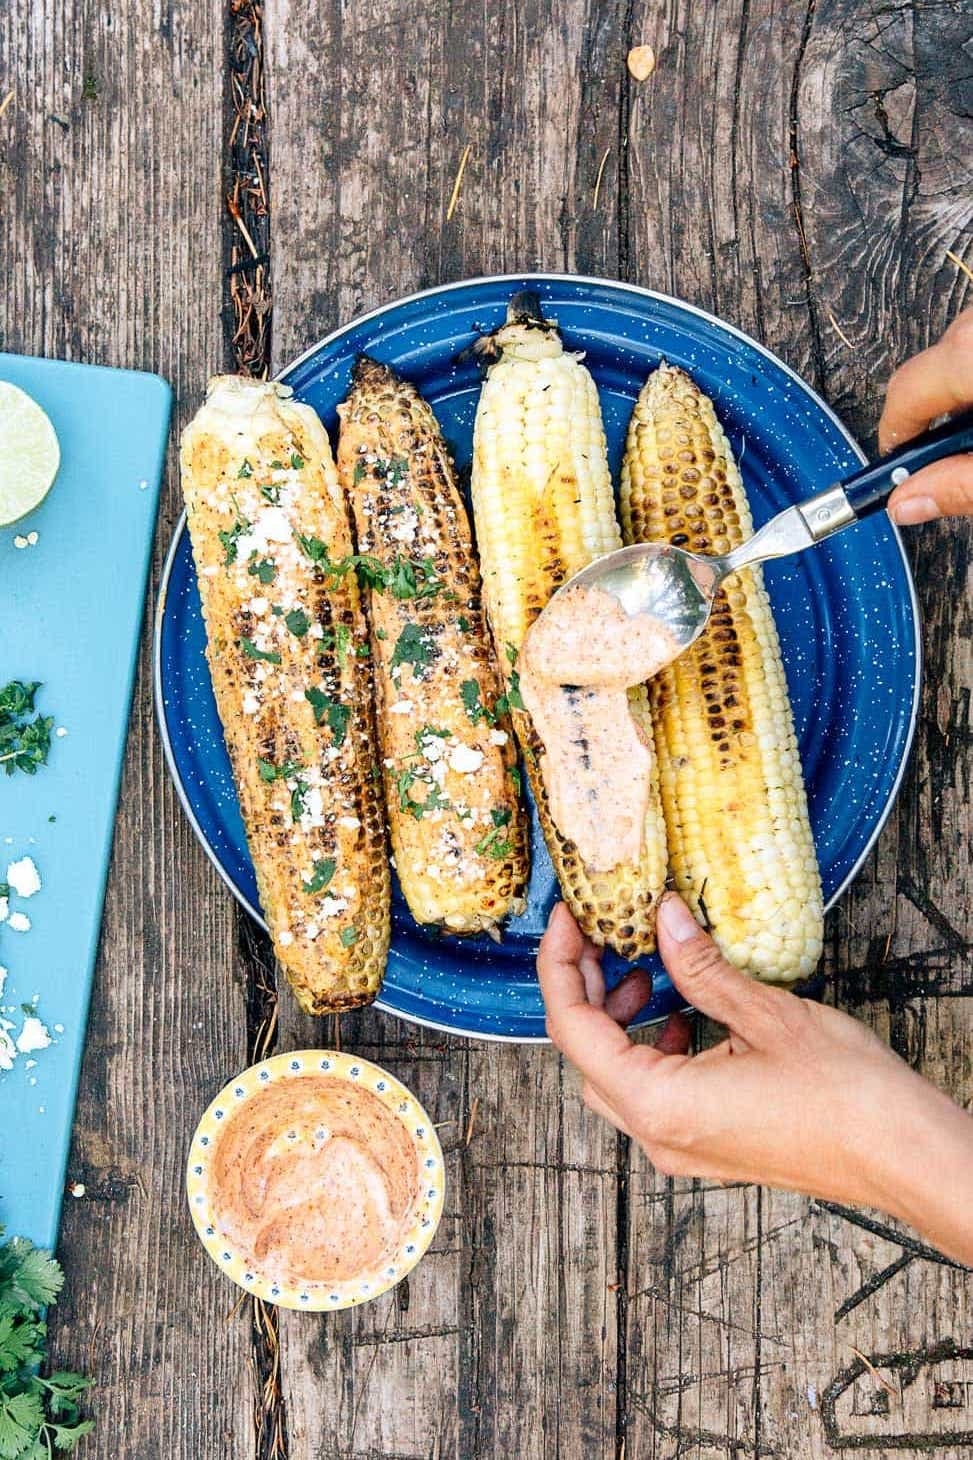 Someone brushing grilled corn with a spicy mayo and chili powder mixture to make Mexican street corn.